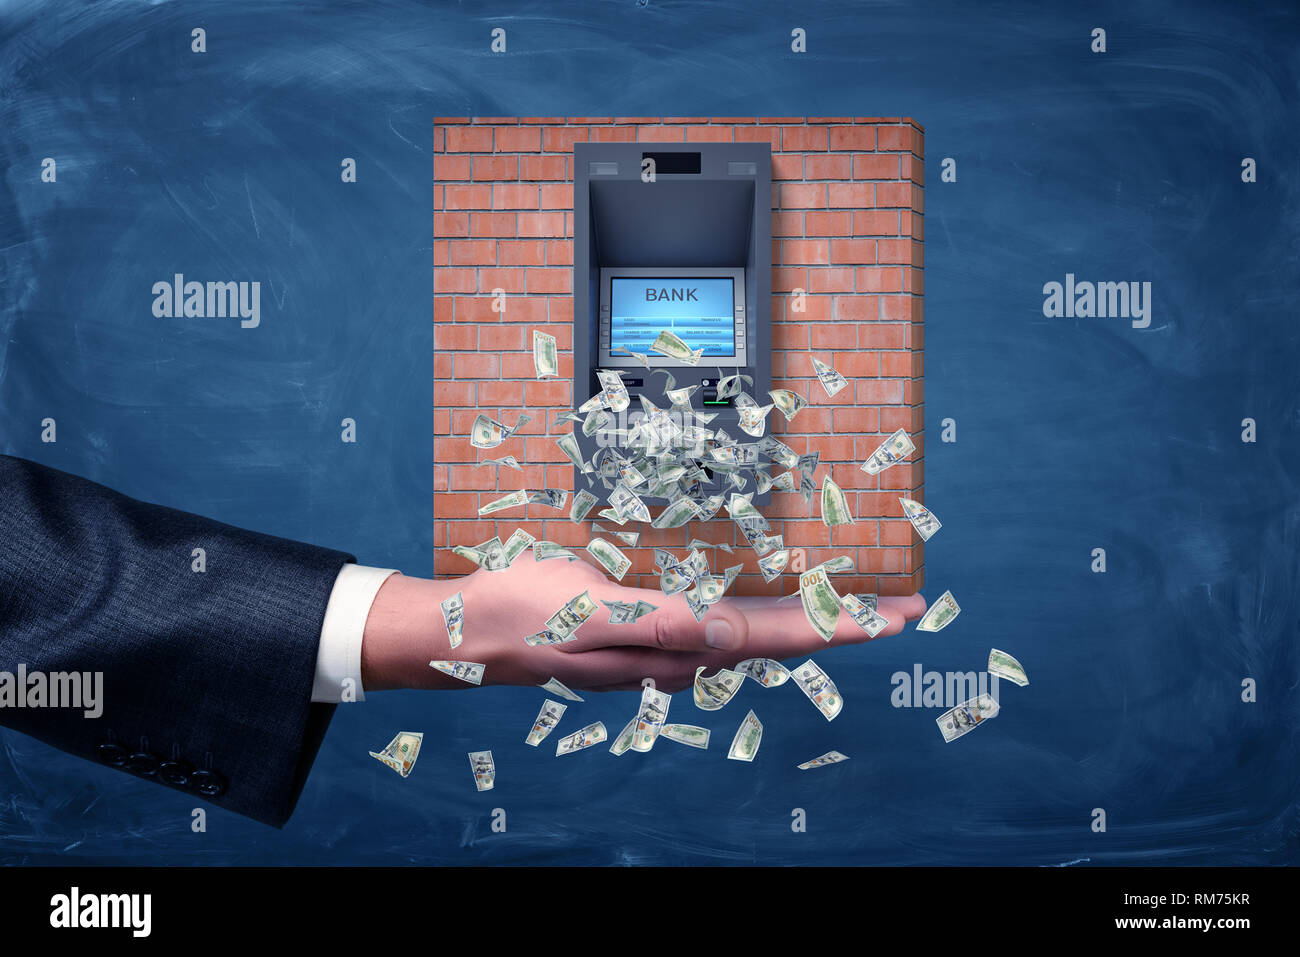 A businessman's palm holding a piece of a brick wall section with an ATM machine giving out dollar bills. Stock Photo